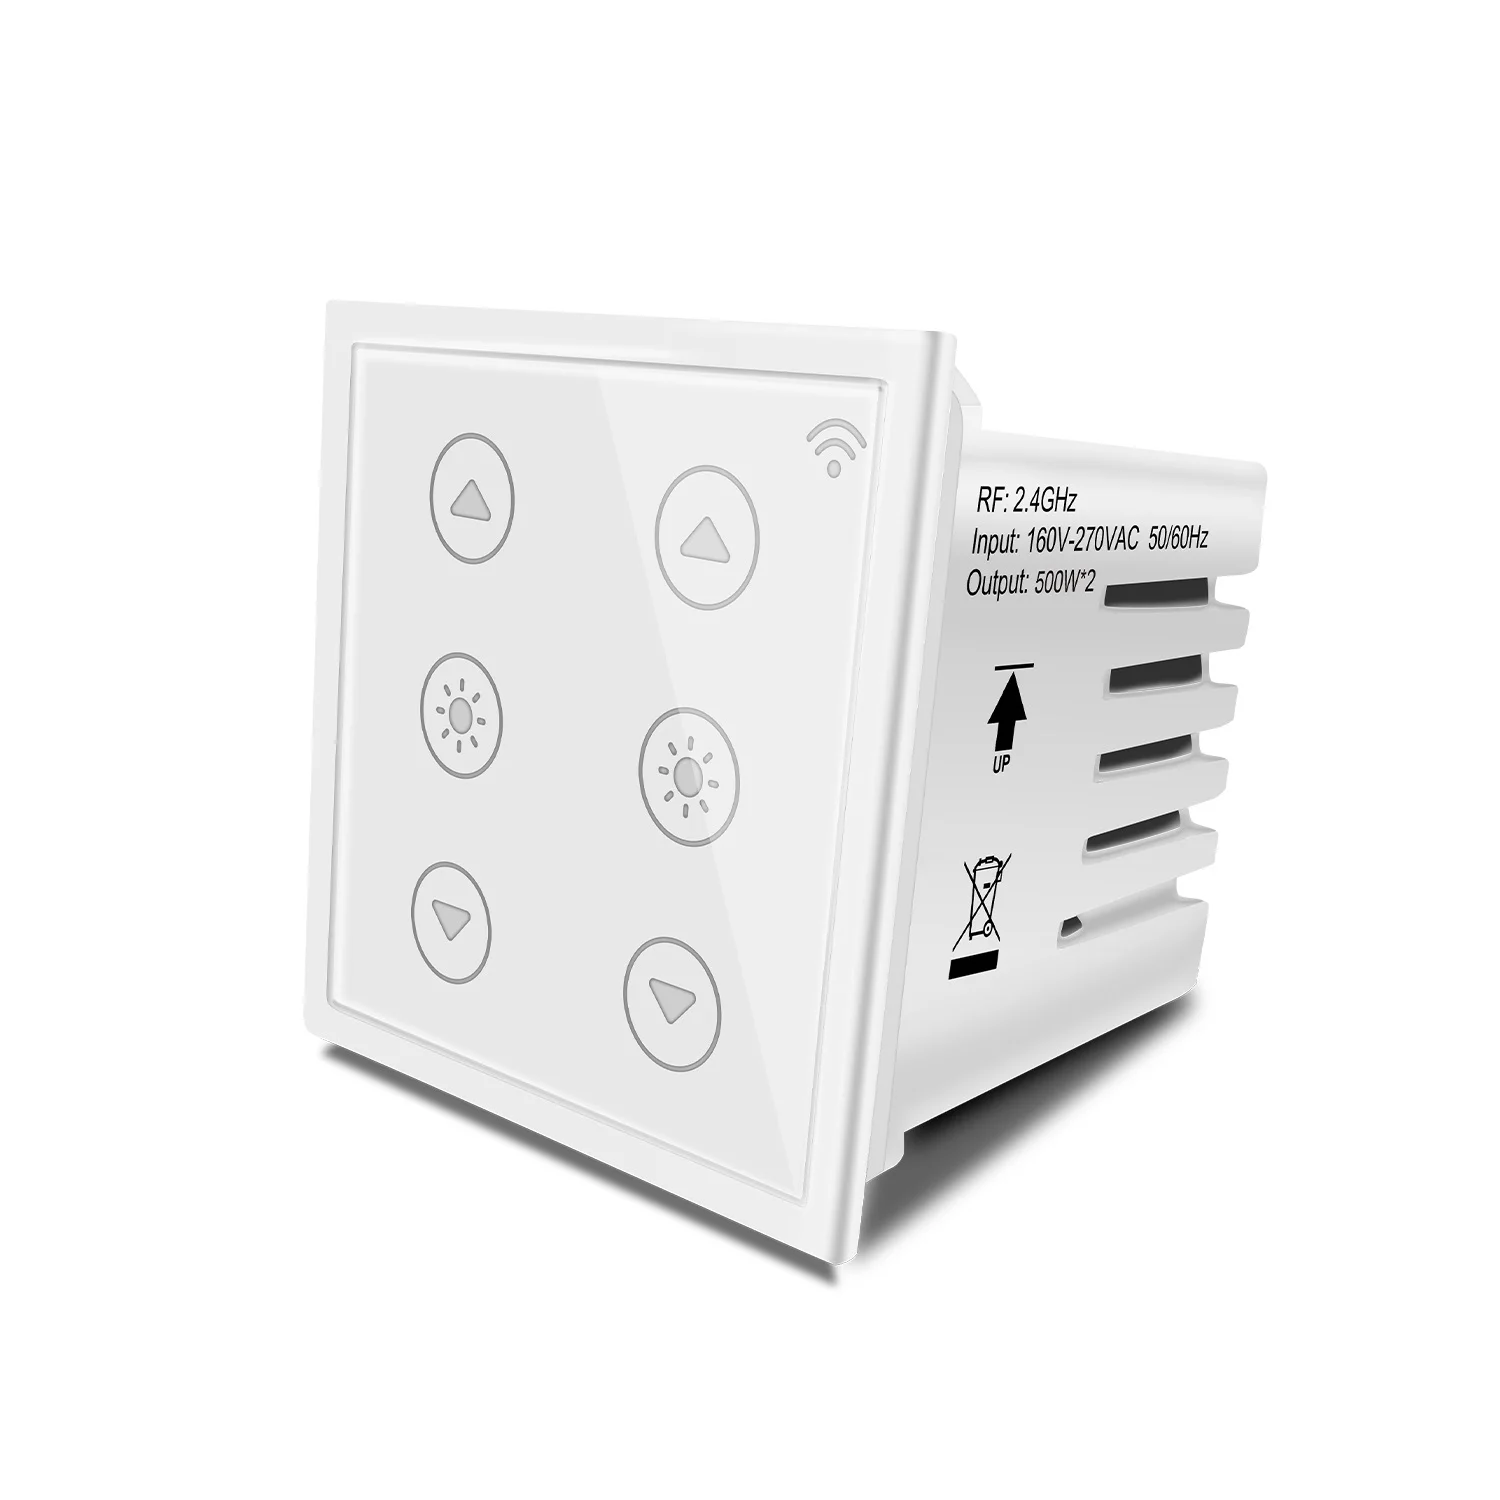 WF520D WiFi Smart Touch Panel  Dimmer Light Switch 2 Gang 1 Way With Modern design